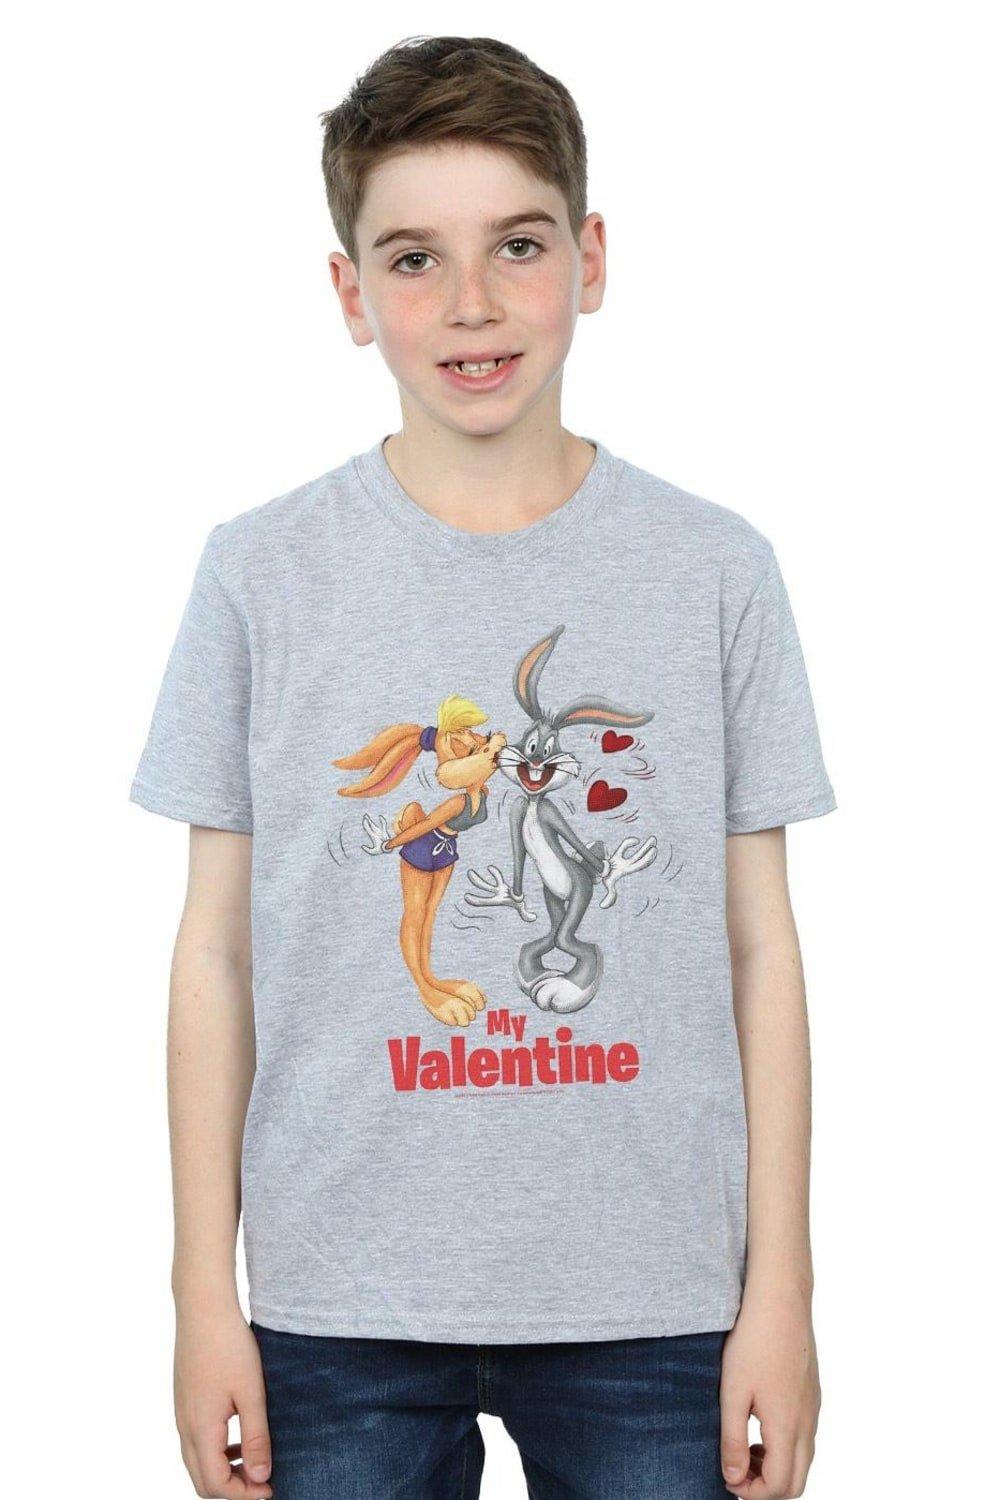 Bugs Bunny And Lola Valentine’s Day T-Shirt